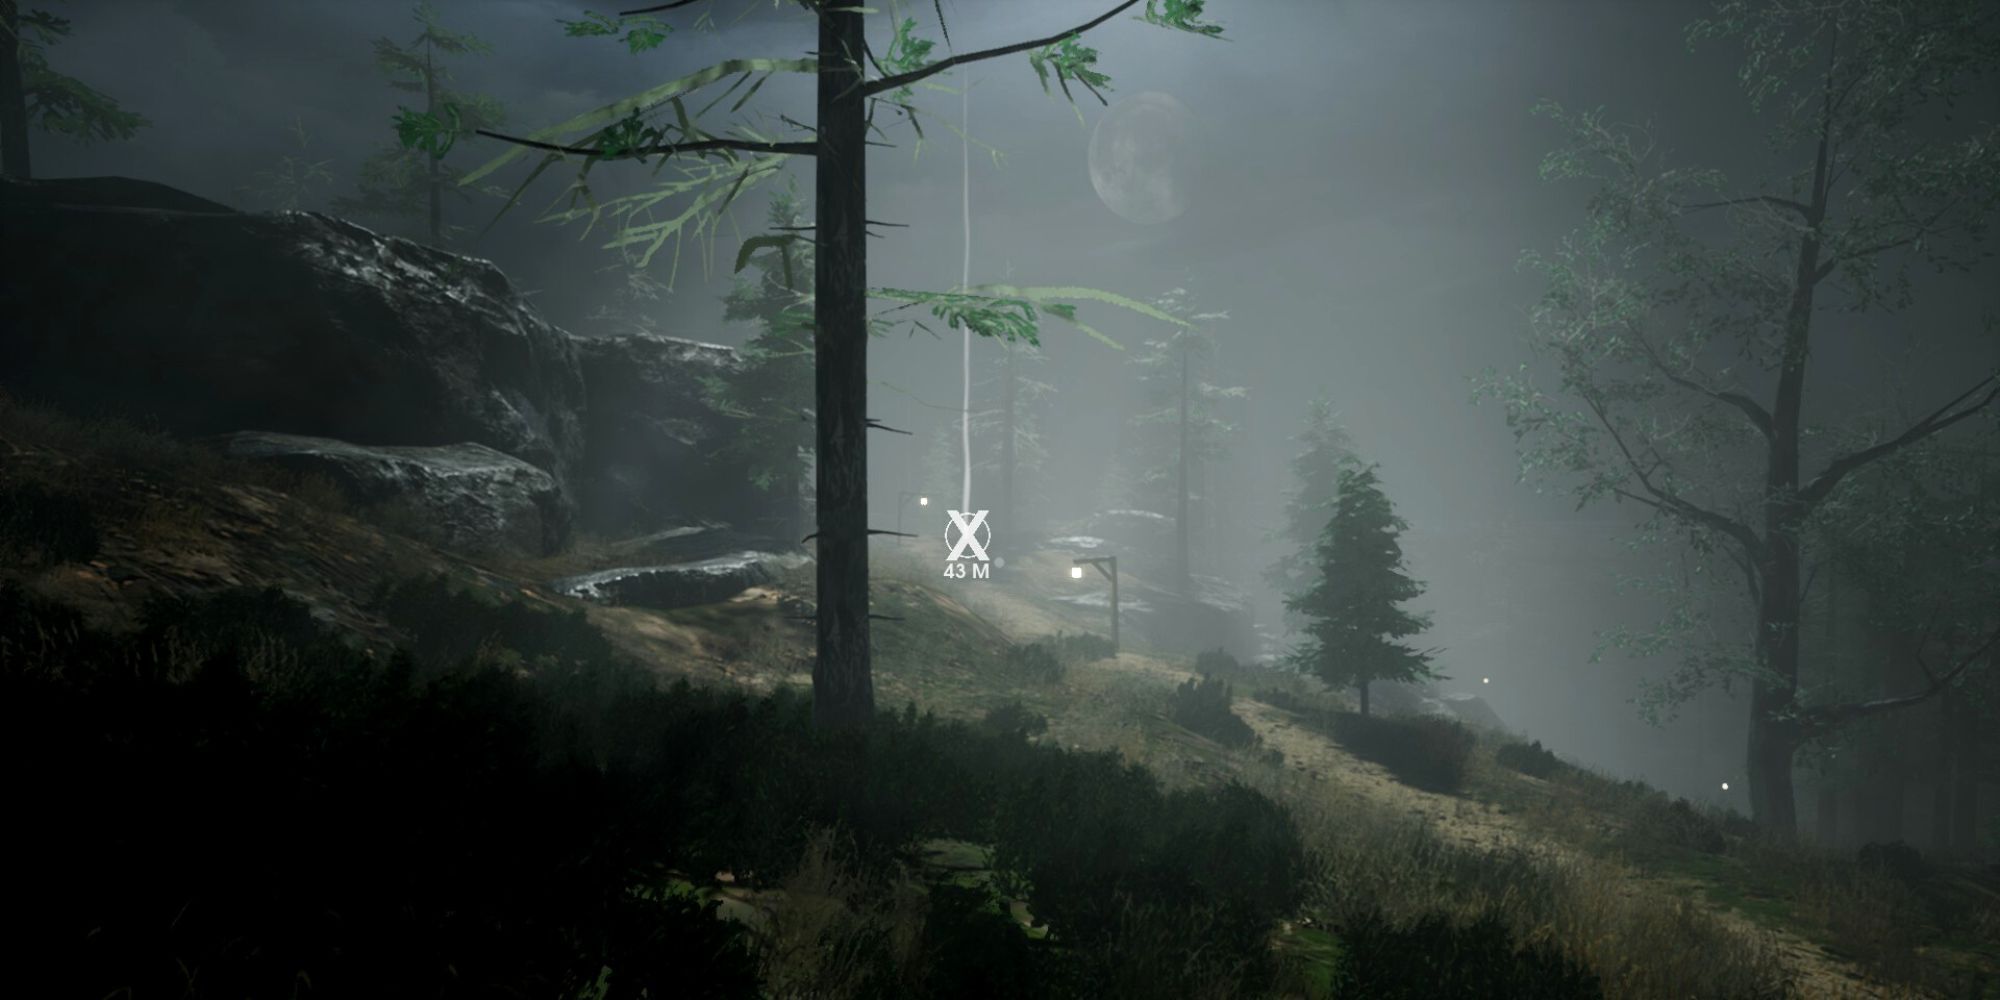 a player waypoint 43m away in the middle of the forest